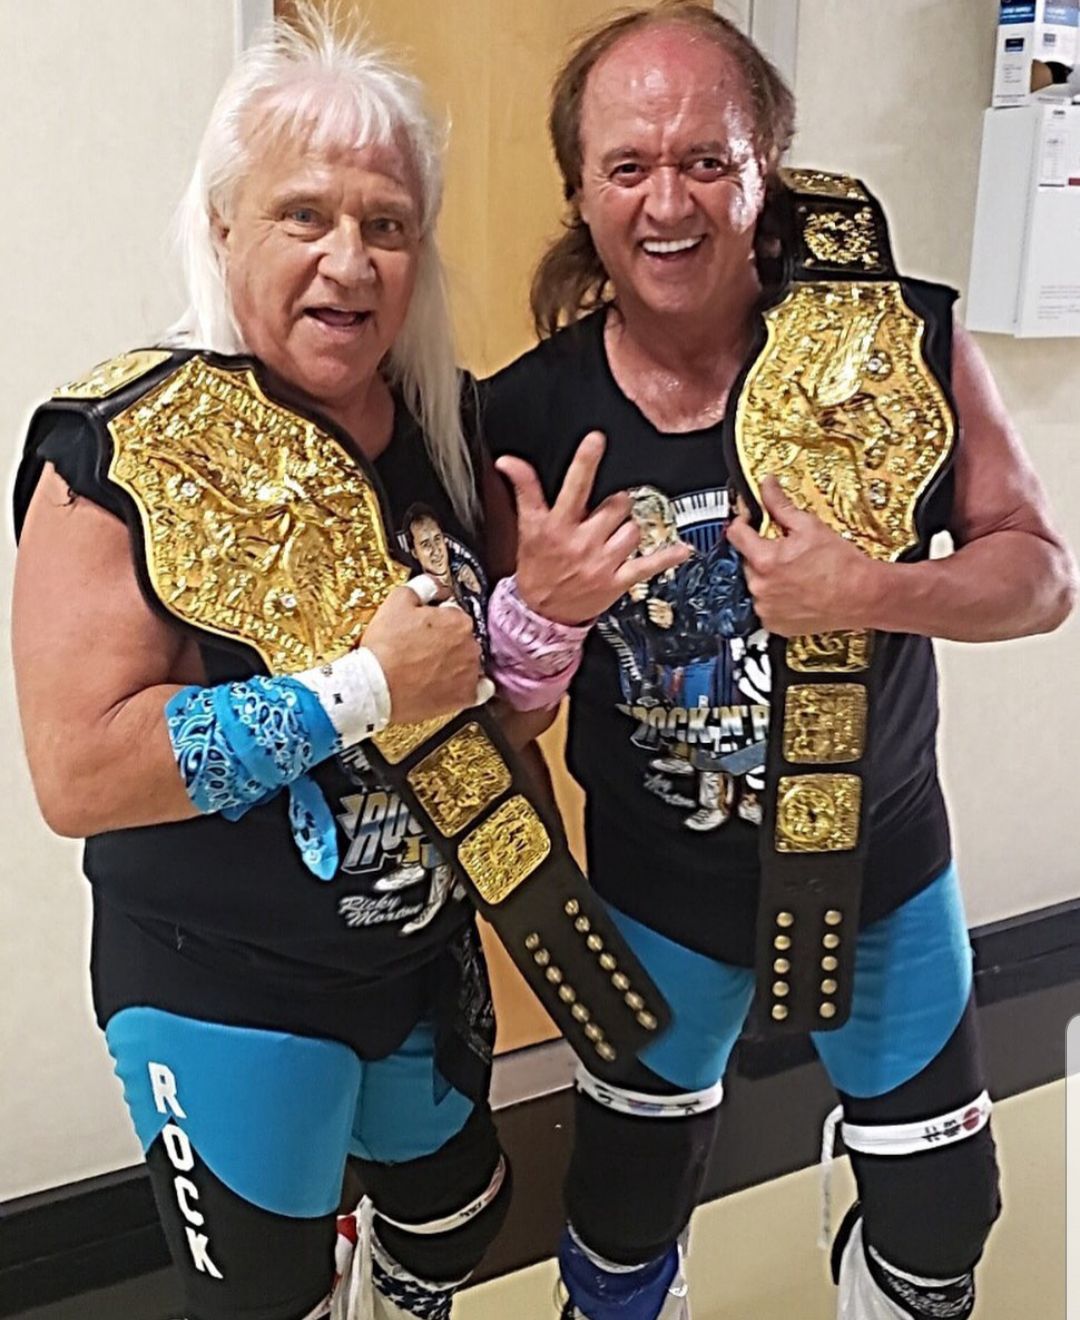 Wrestling's Rock 'n' Roll Express tag team is here to stay | Wrestling |  